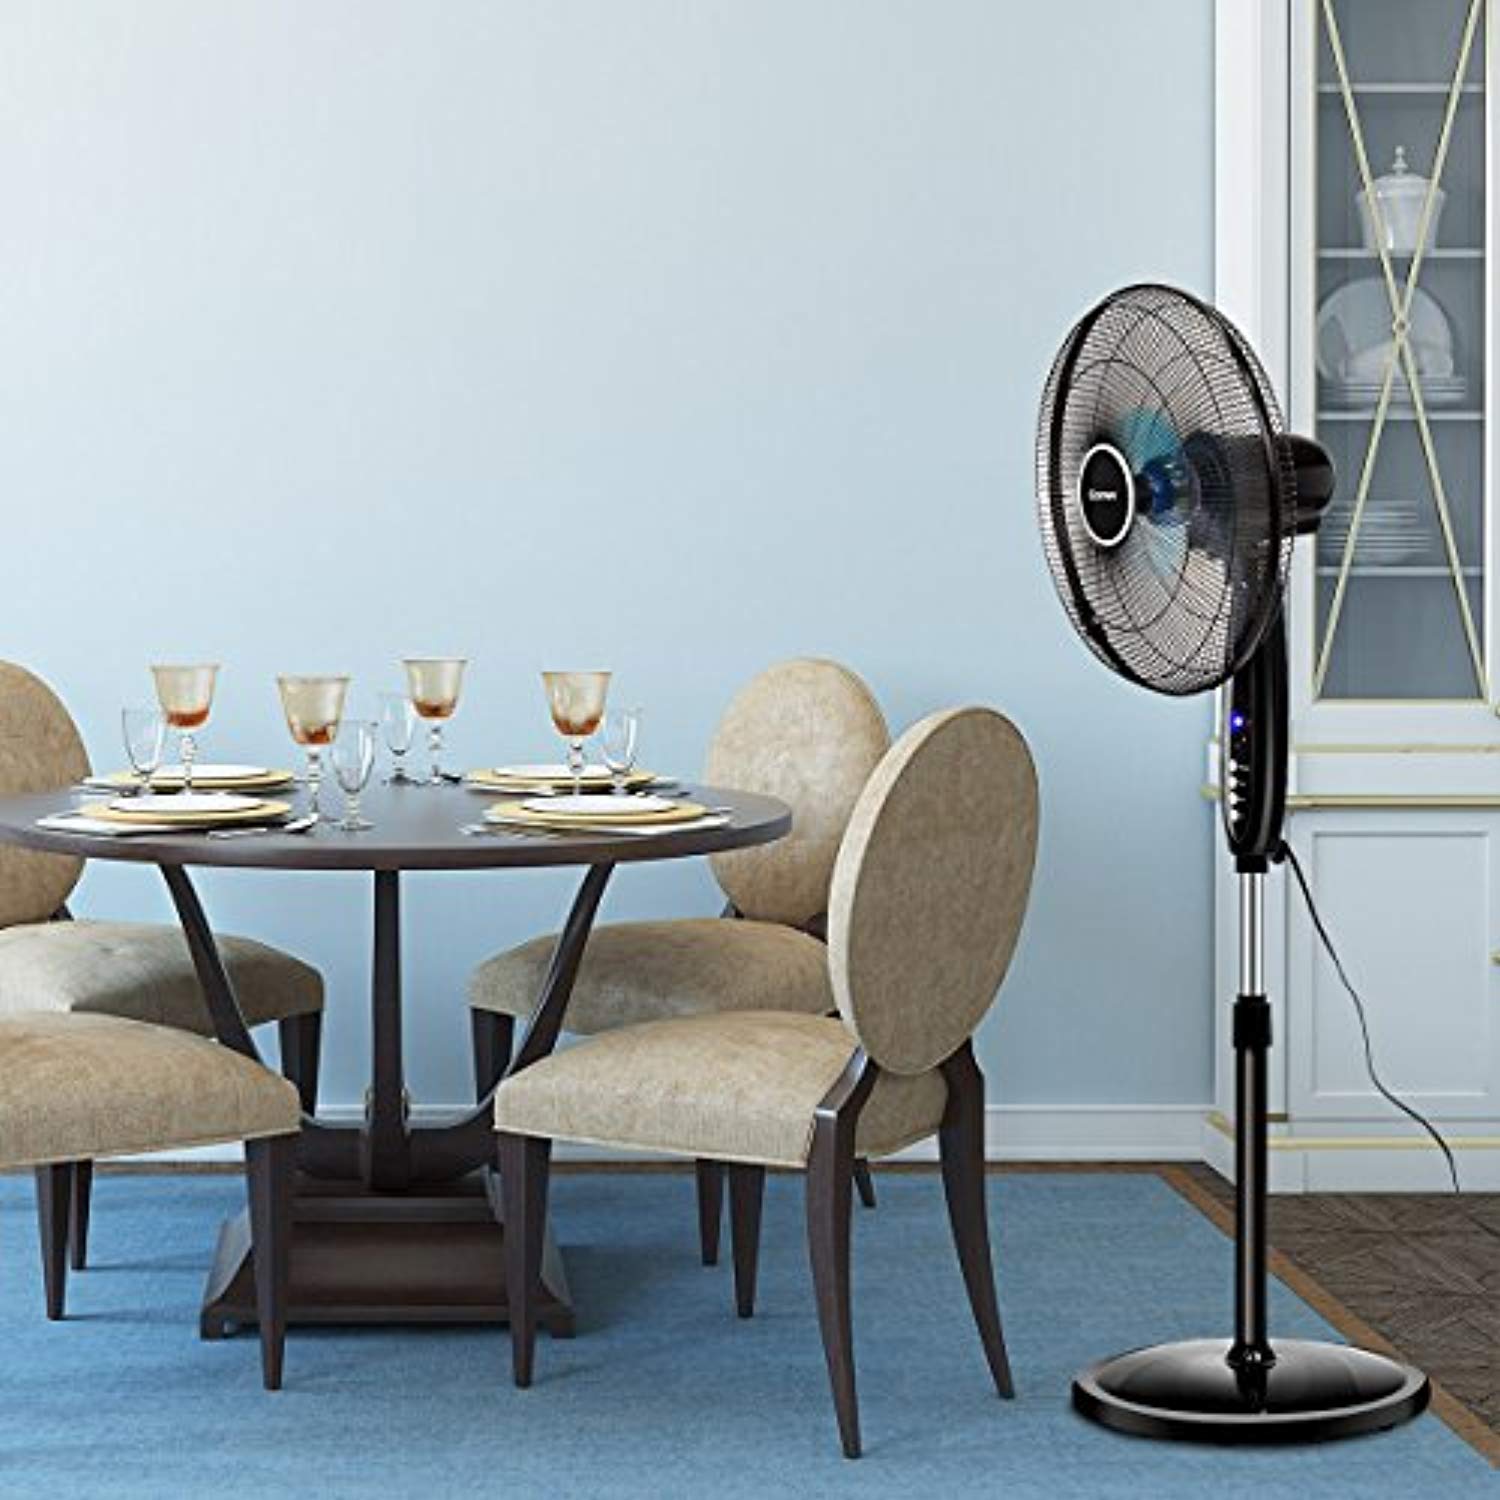 COSTWAY Pedestal Fan, 3-Speed Digital Control- Adjustable Height-  Oscillating Standing Fan w/Timer- LCD Display- Double Blades- Remote  Control